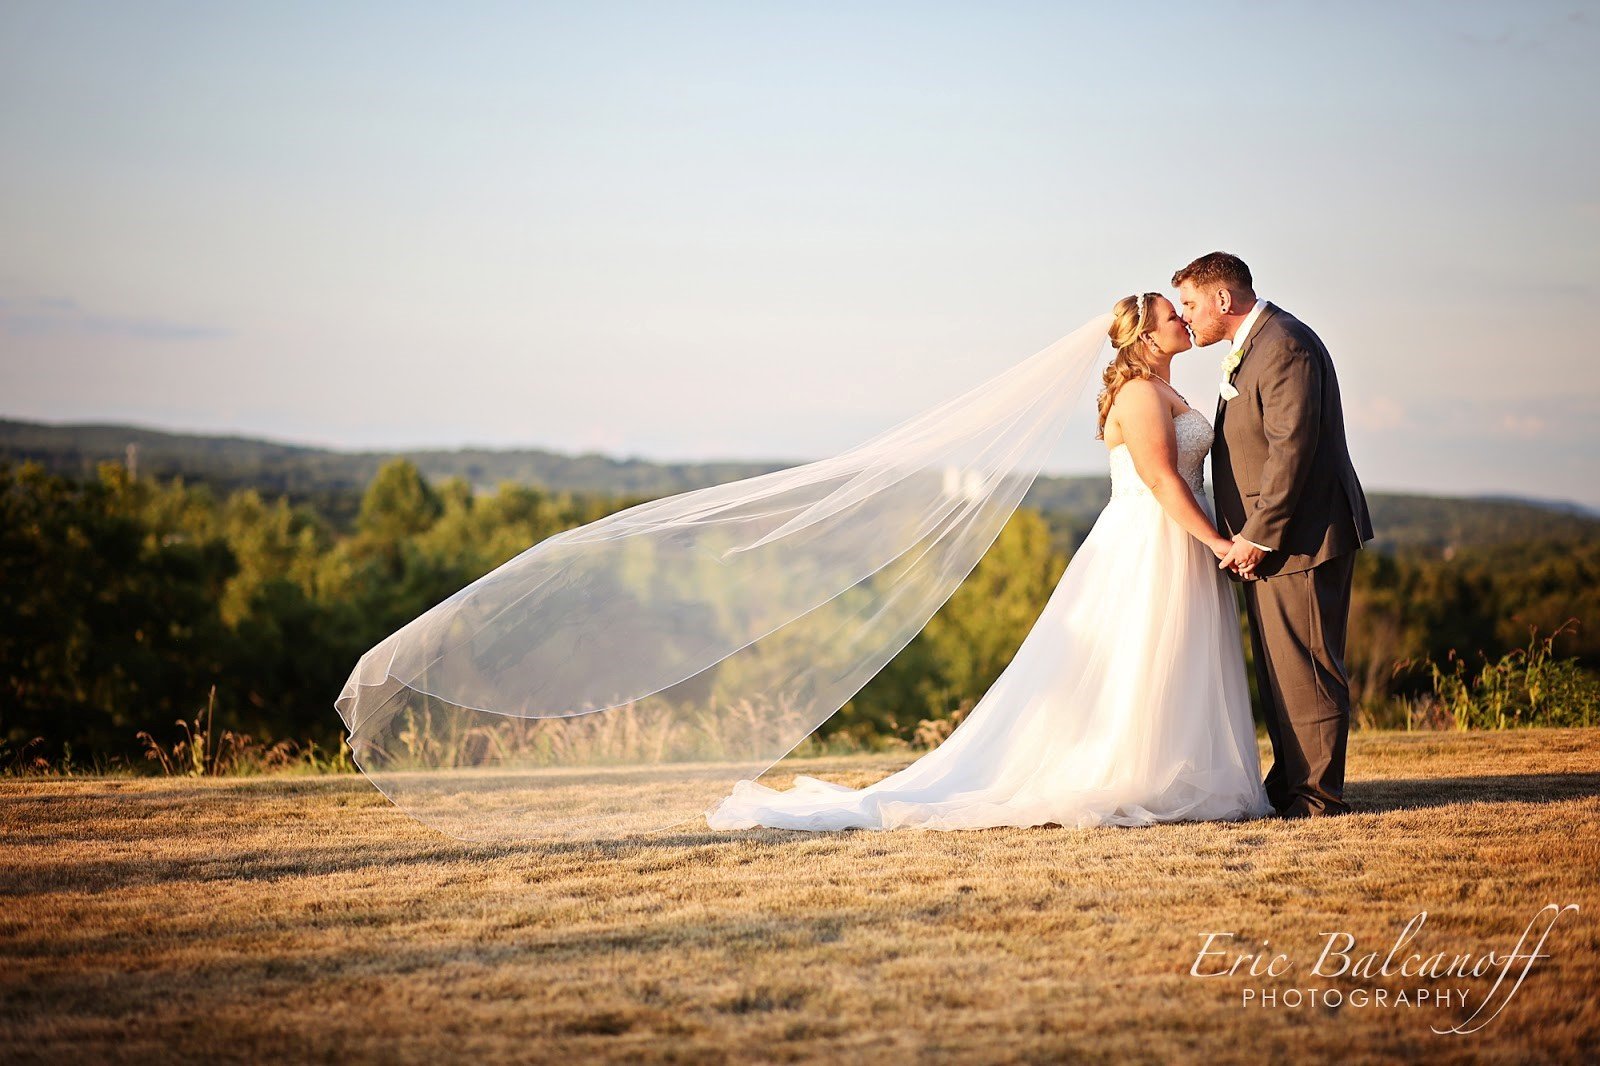 Should You Invest In Wedding Photography? [A Professional Photographer's Point Of View]